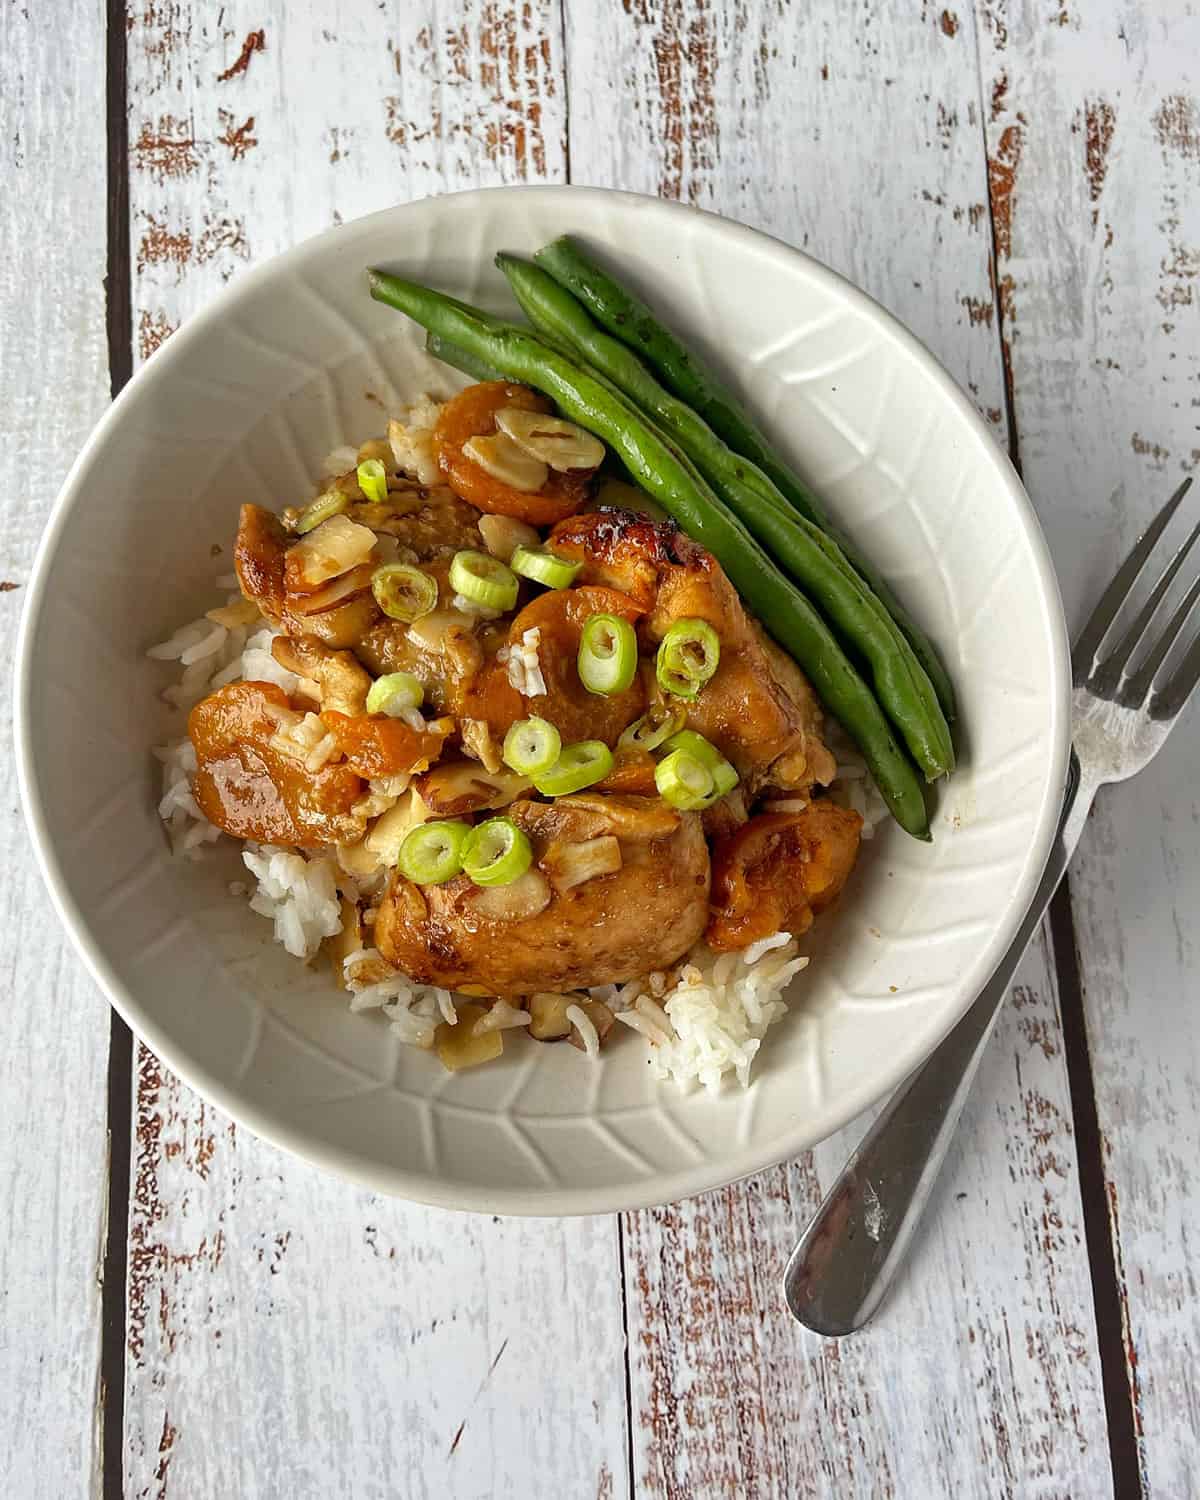 Apricot chicken served on rice with green beans in a white bowl.